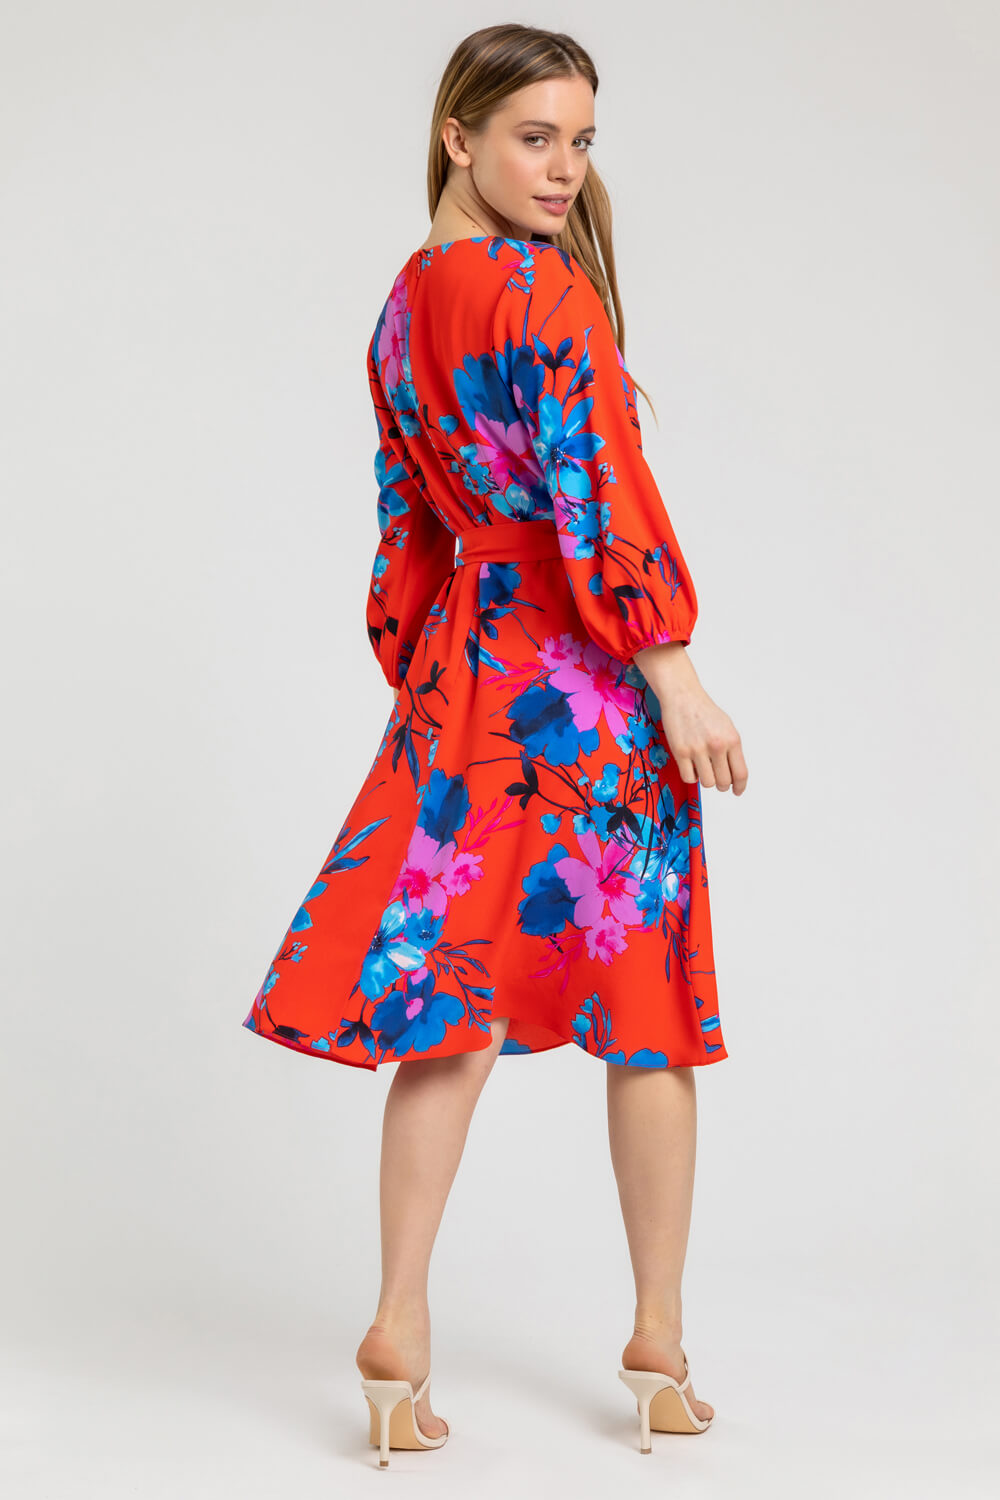 Red Petite Floral Fit & Flare Dress, Image 2 of 4